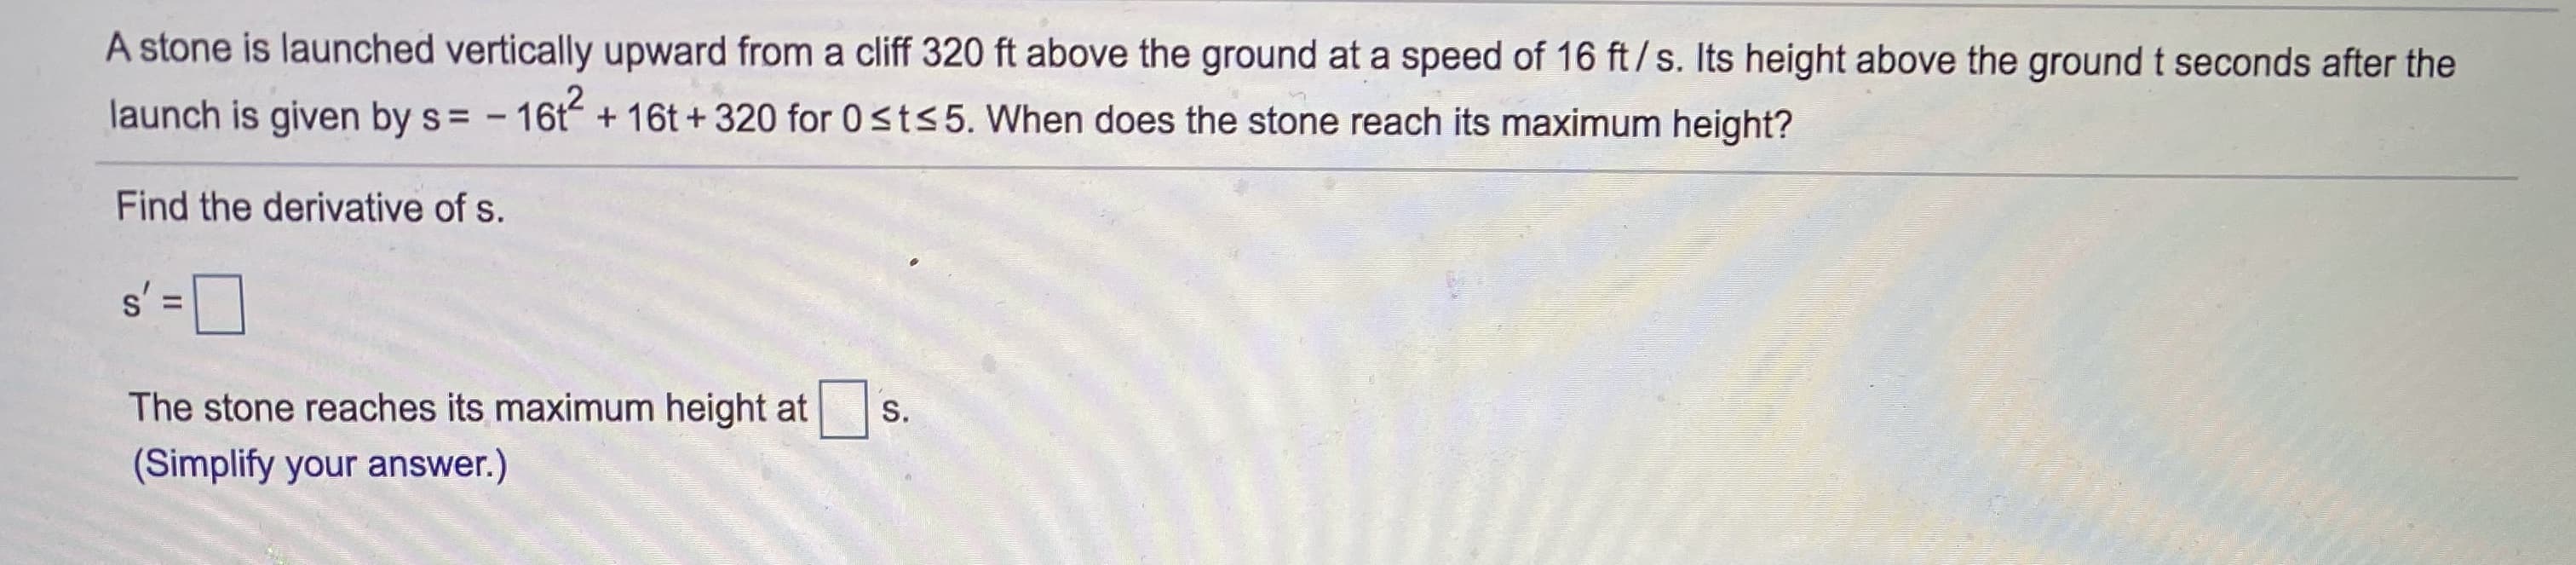 A stone is launched vertically upward from a cliff 320 ft above the ground at a speed of 16 ft/s. Its height above the ground t seconds after the
launch is given by s= - 16t
+ 16t + 320 for 0sts5. When does the stone reach its maximum height?
Find the derivative of s.
s' =D
The stone reaches its maximum height at |
S.
(Simplify your answer.)
